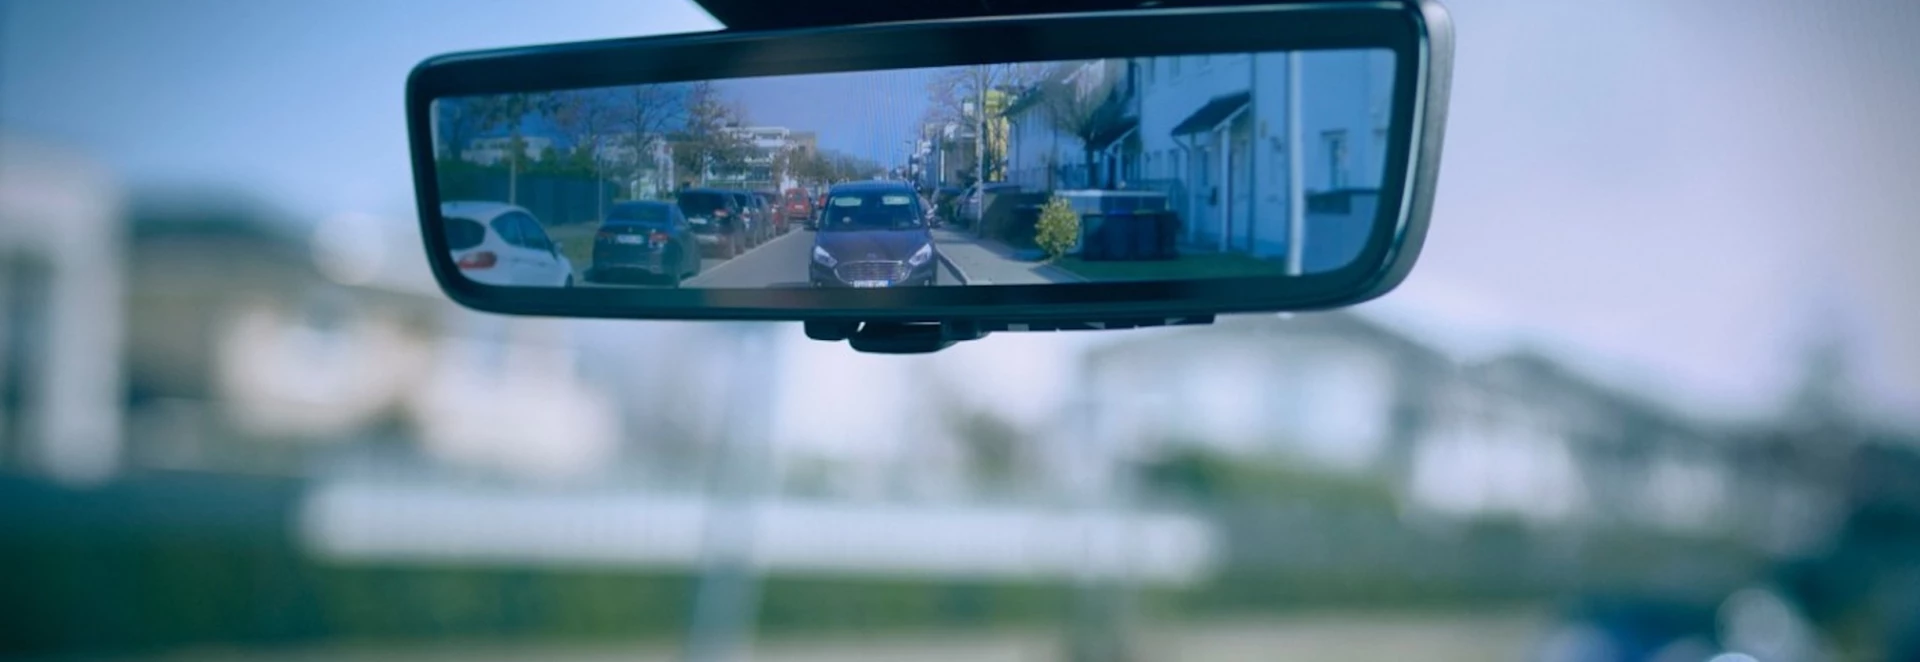 Ford introduces new ‘Smart Mirror’ for Transit models 